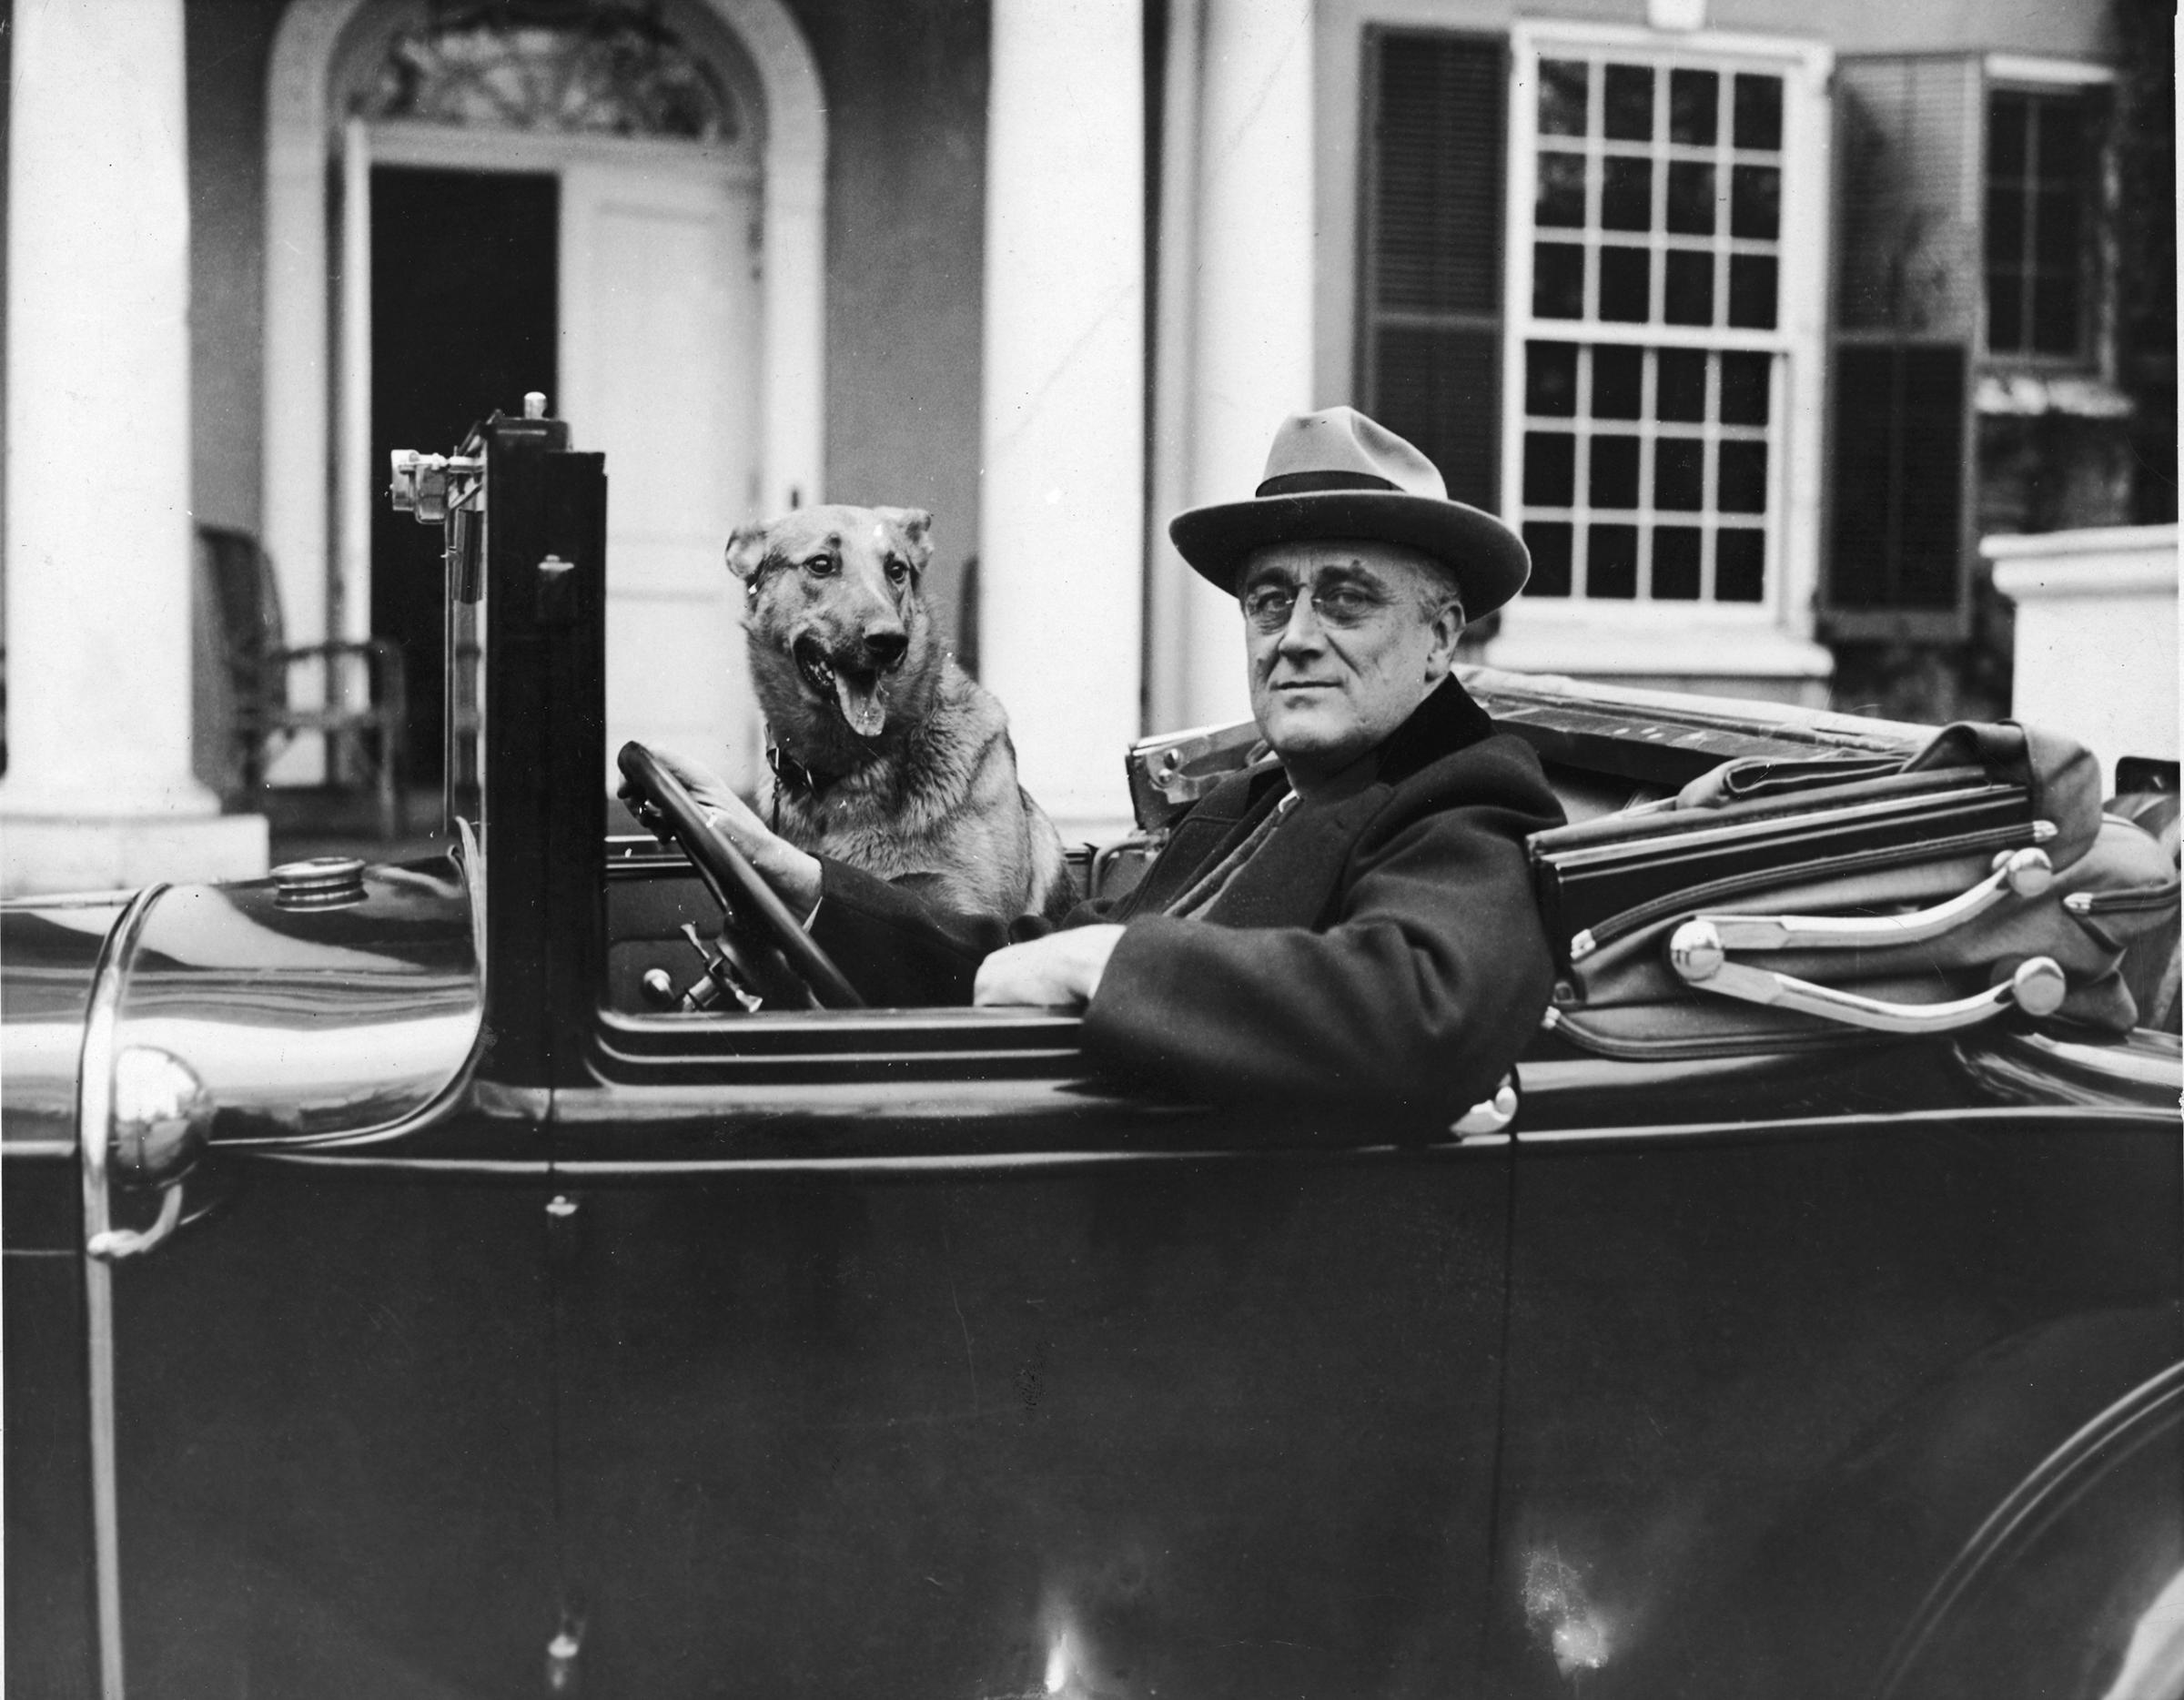 Franklin Delano Roosevelt sits behind the wheel of his car with his German Shepherd, Major, outside of his home in Hyde Park, New York, in the mid 1930's.